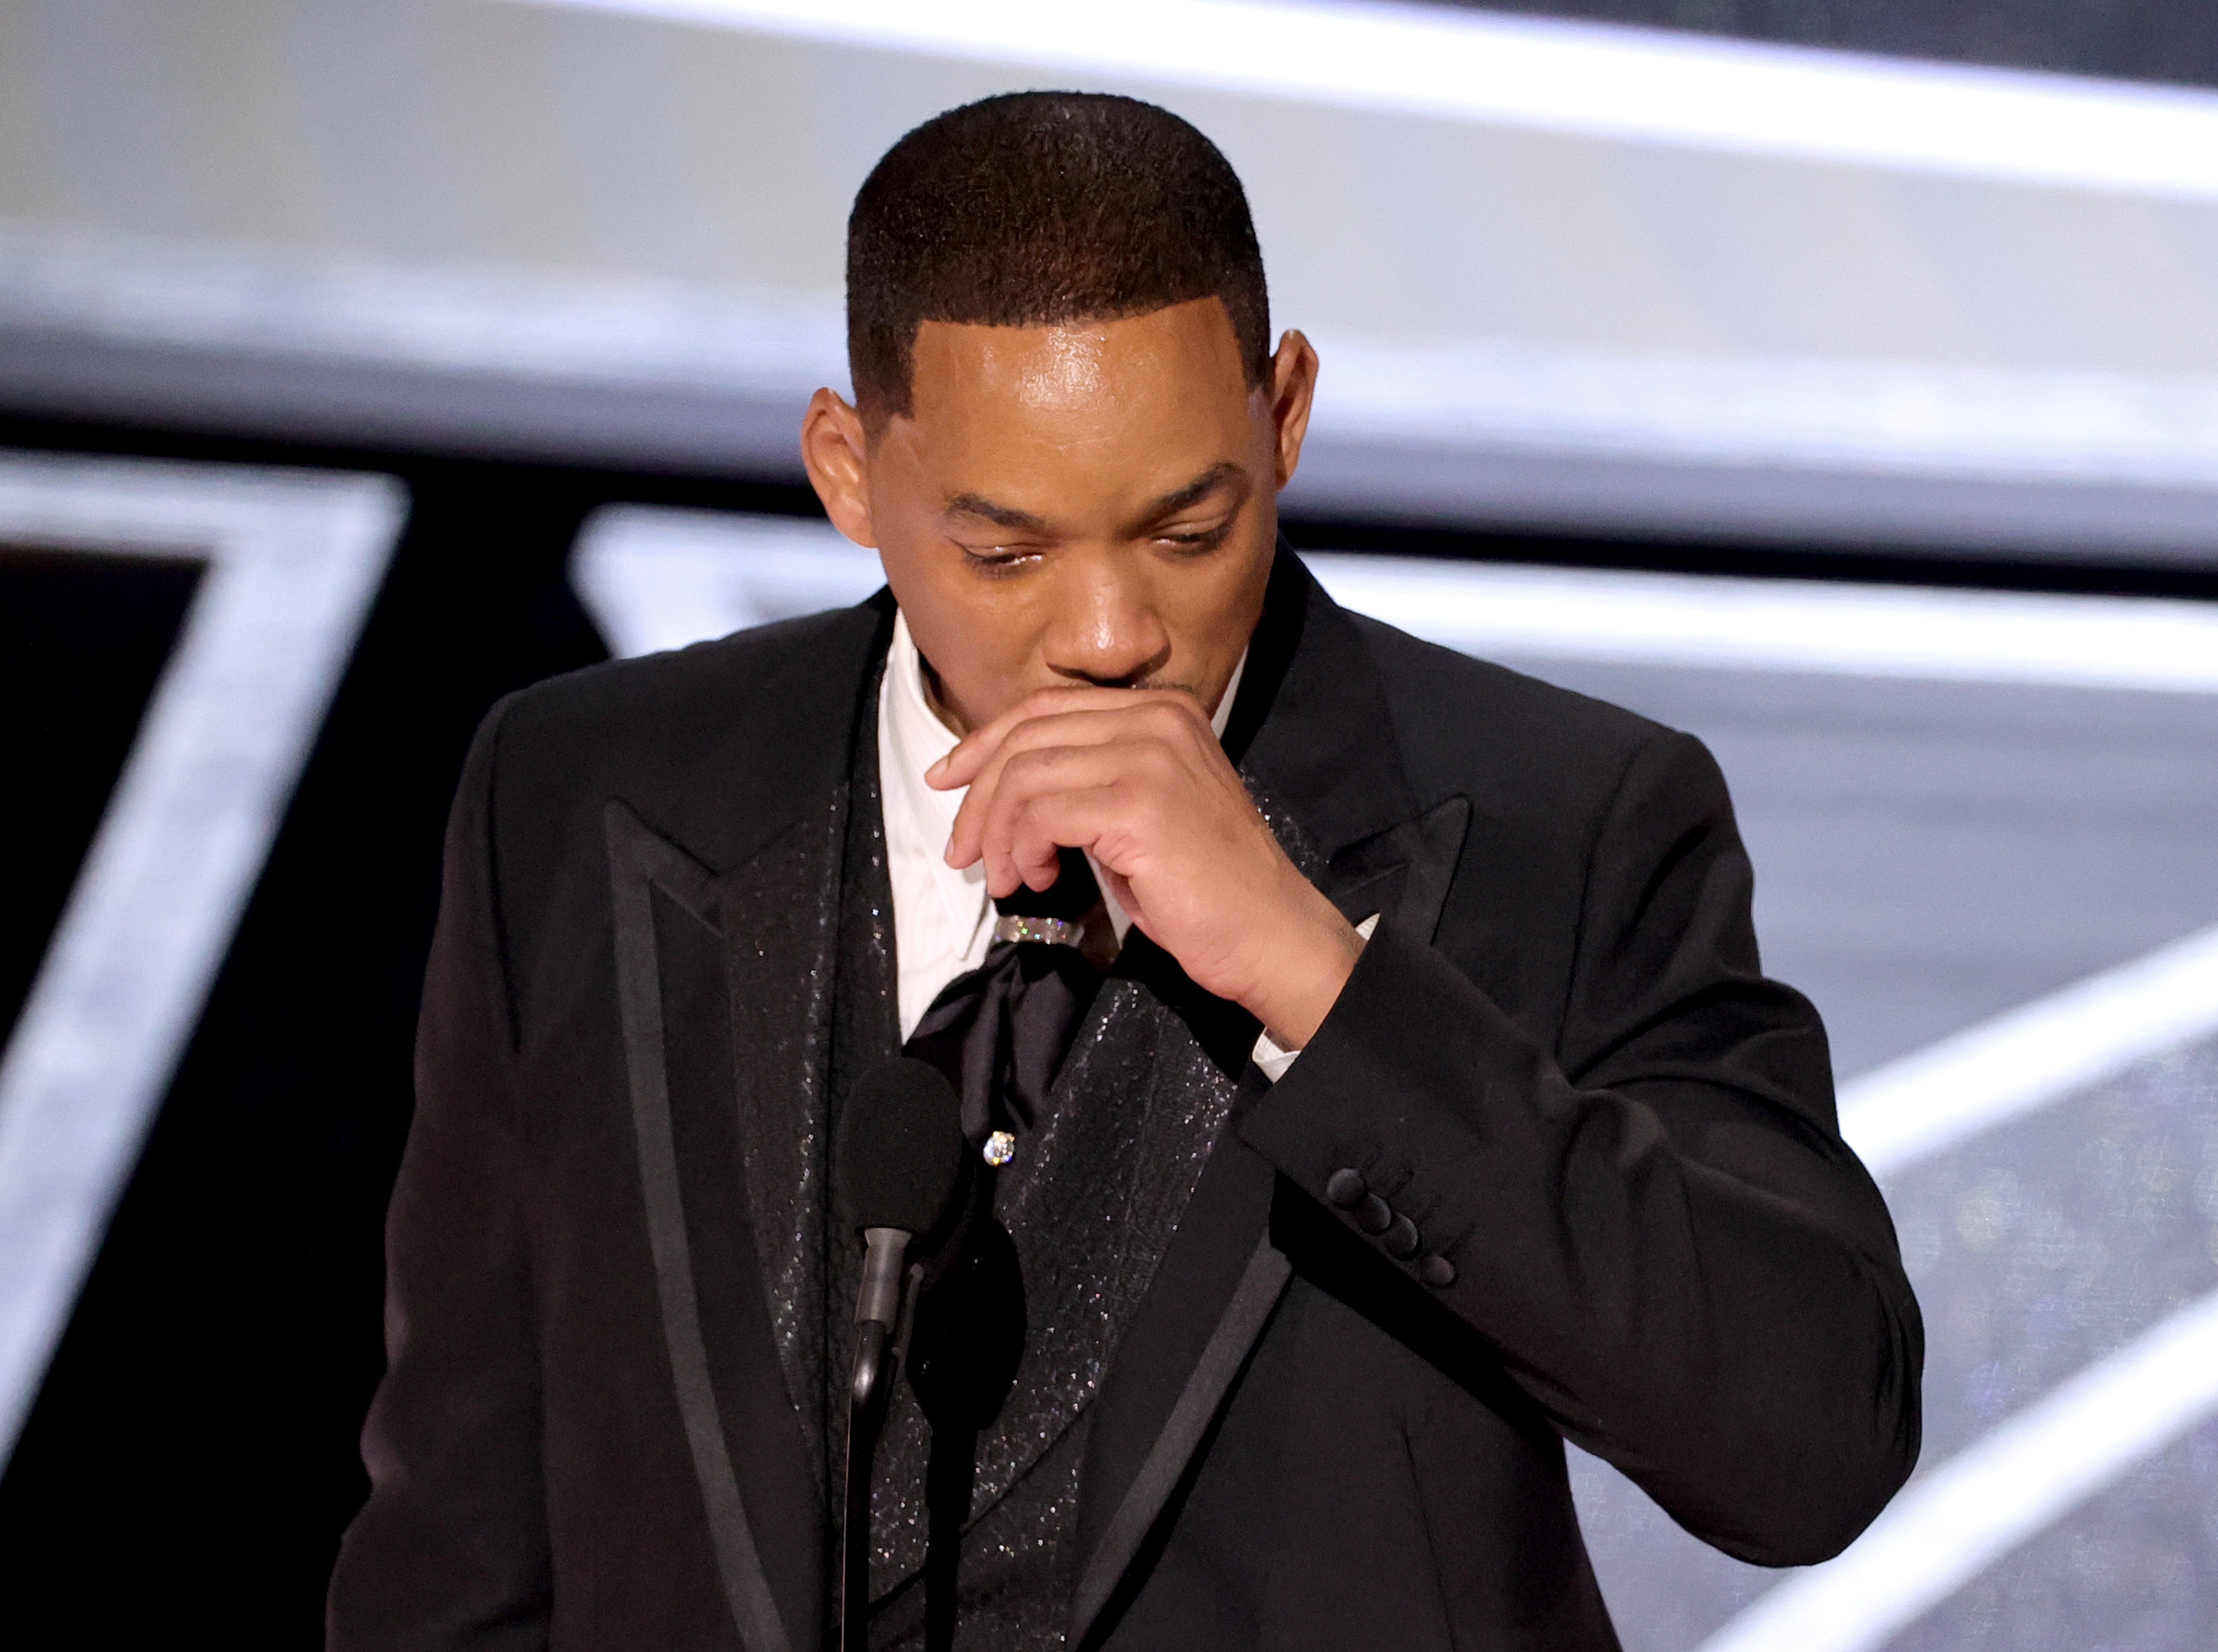 Will Smith accepting his Oscar for Best Actor, shortly after hitting Chris Rock for a joke about his wife, Jada Pinkett Smith